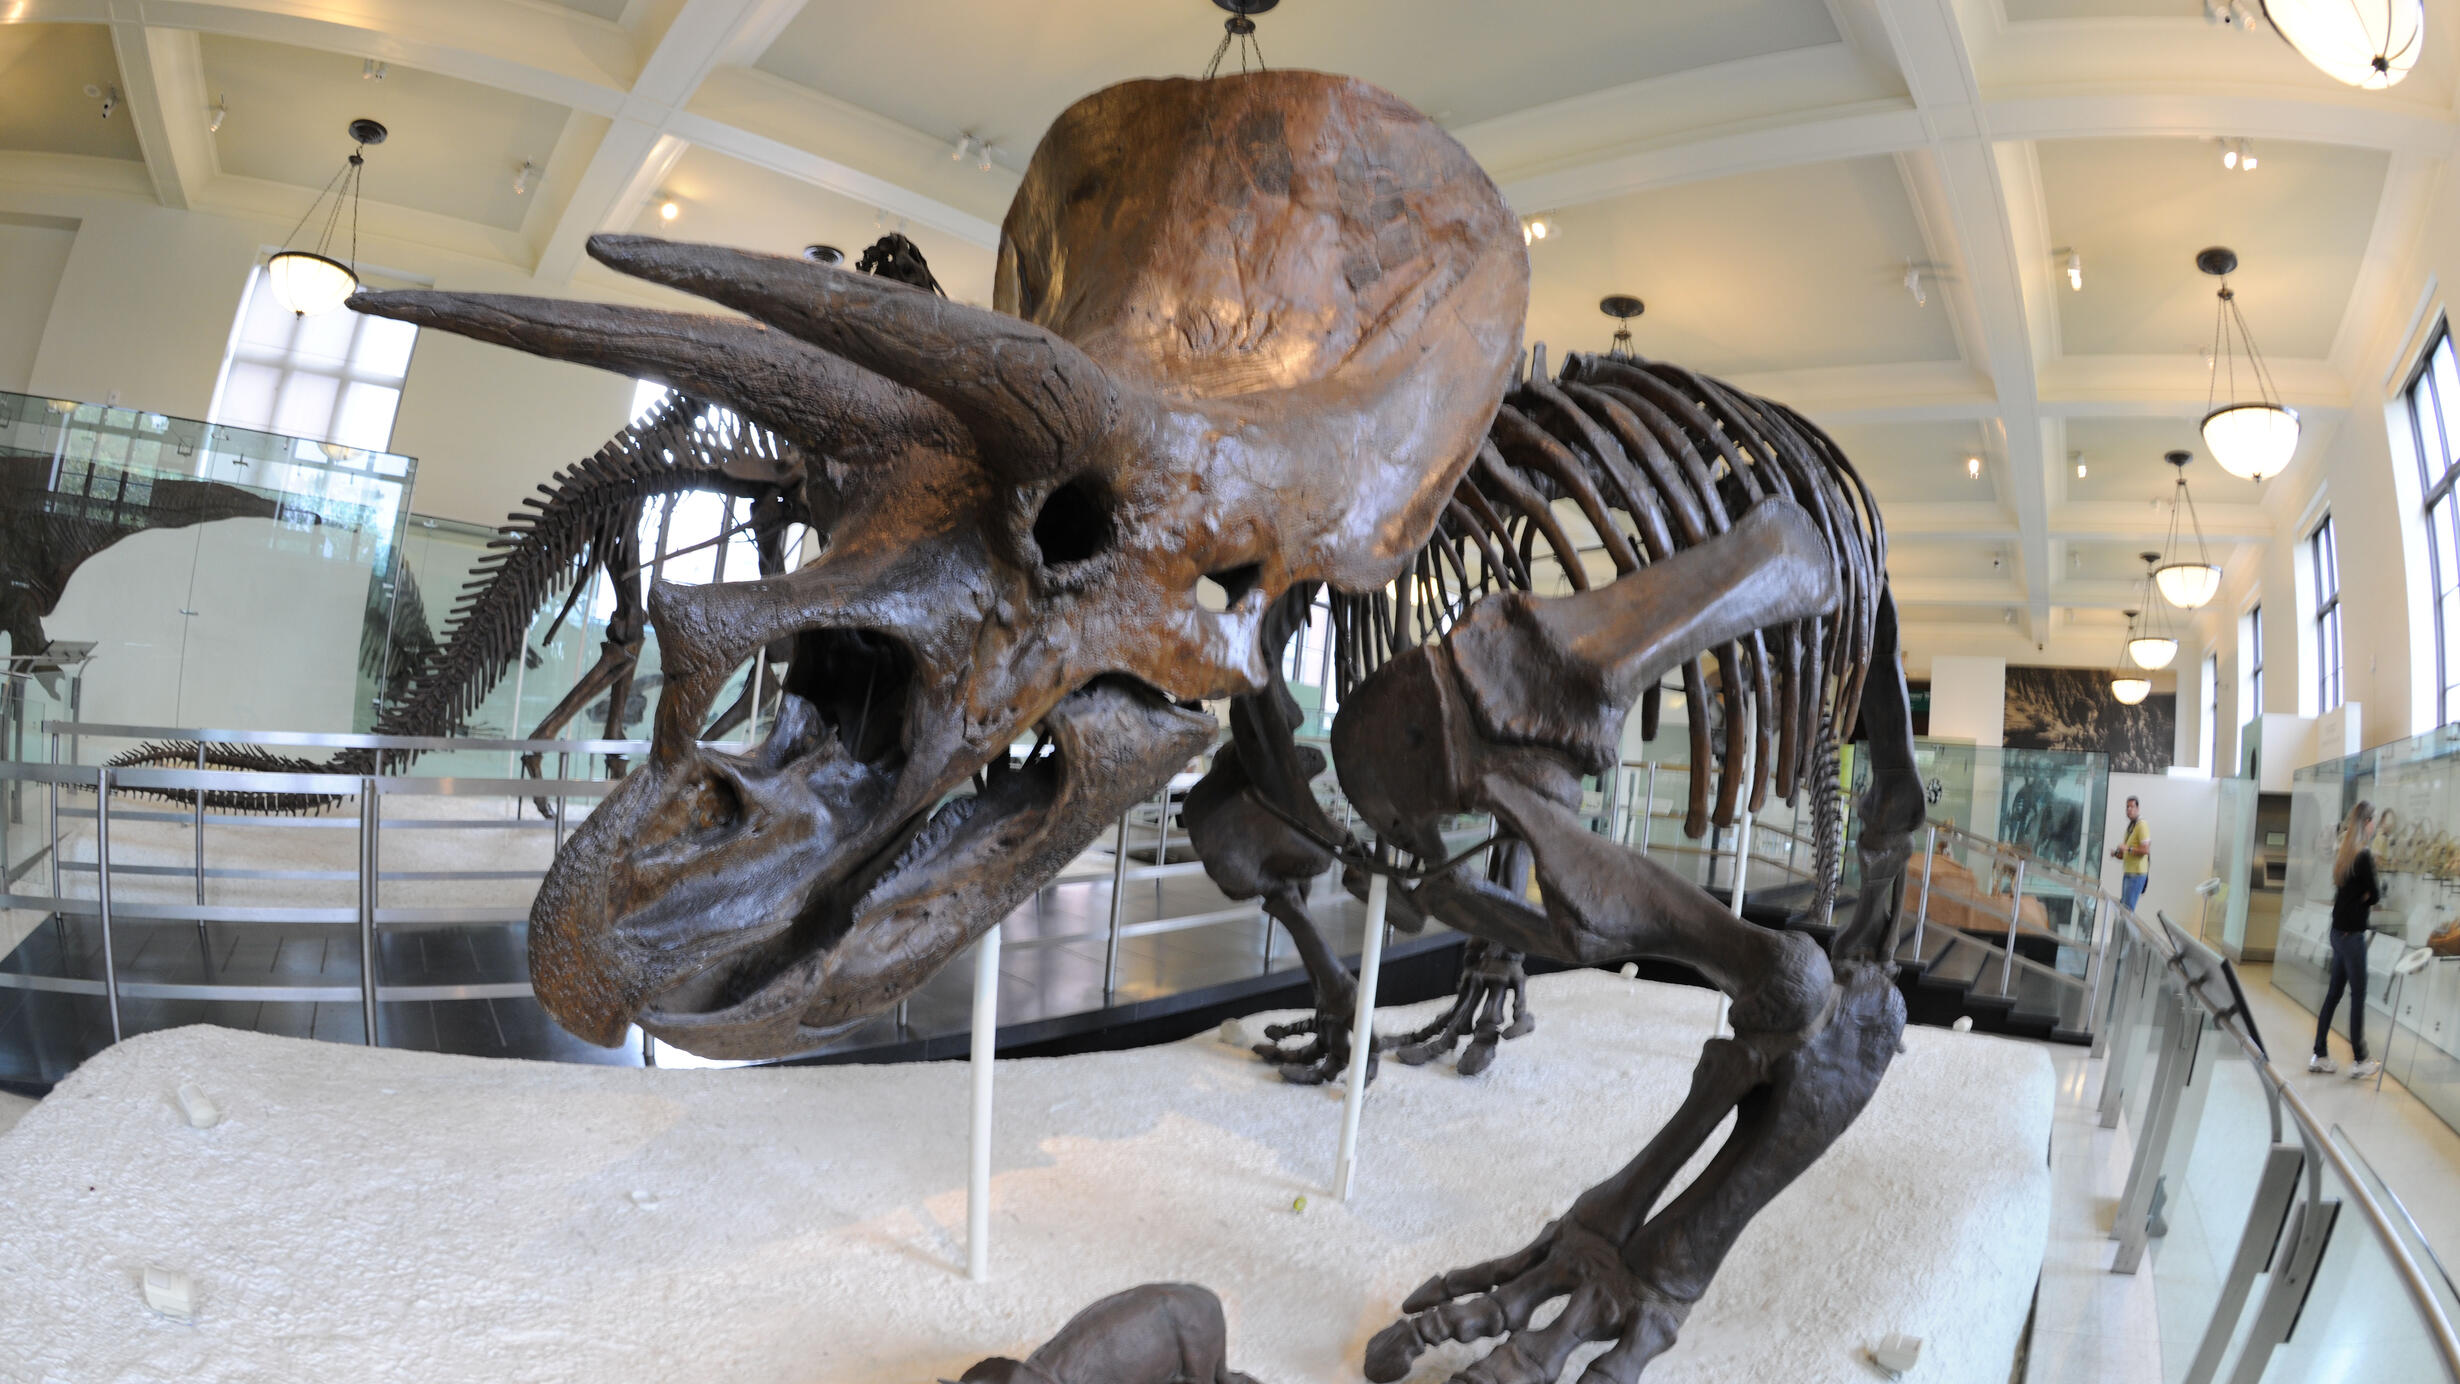 Triceratops dinosaur mount in the Museum's fourth floor fossil halls.